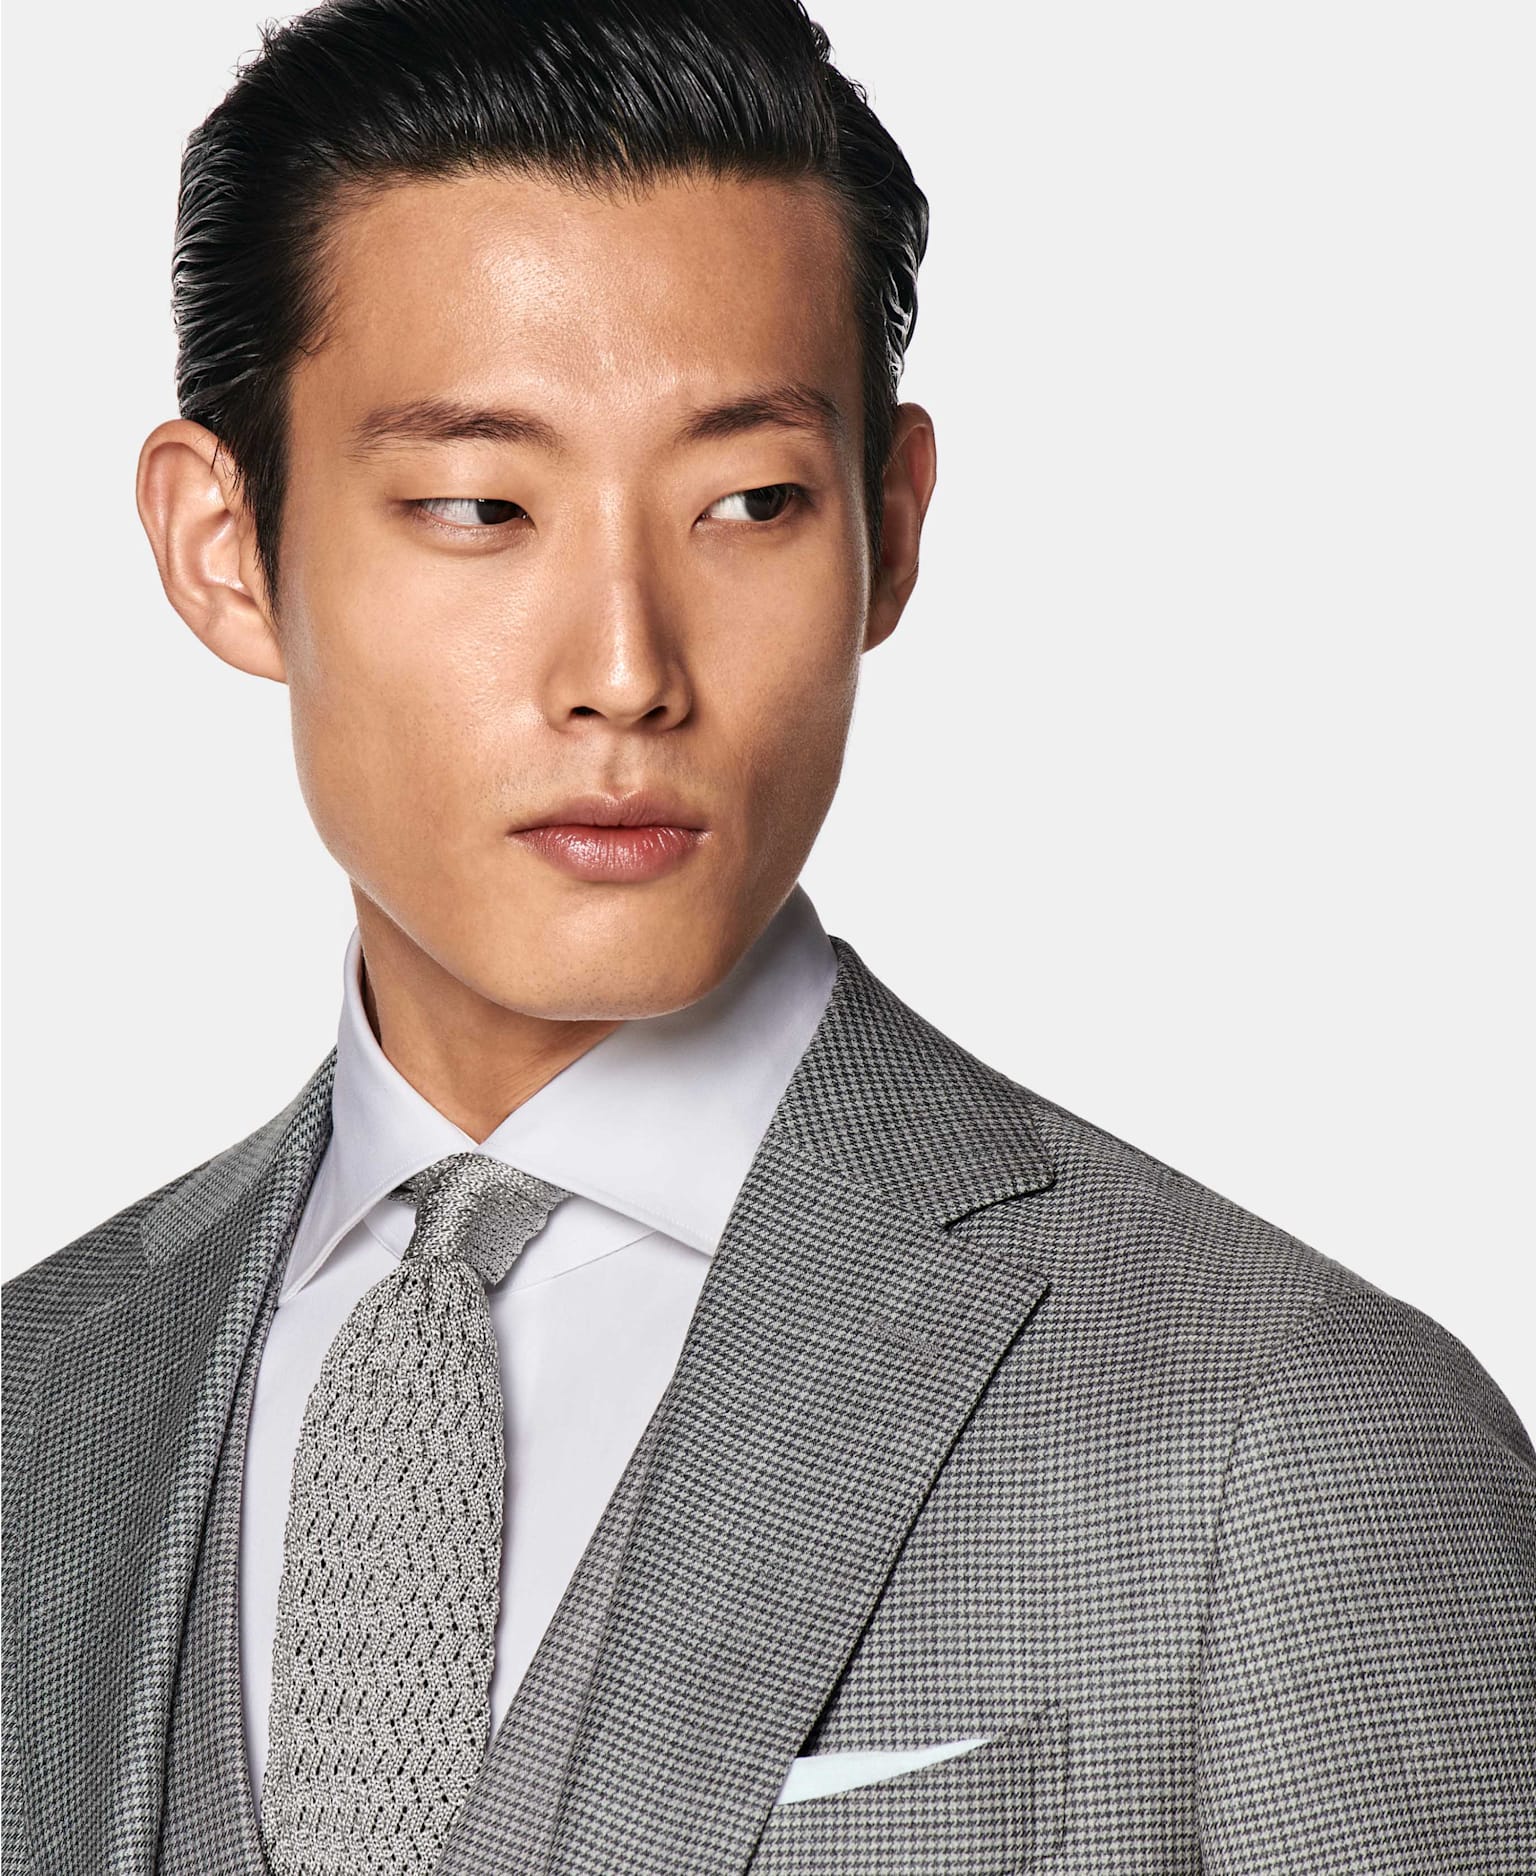 Image of a winter formal suit, featuring an alpaca wool blend houndstooth look.